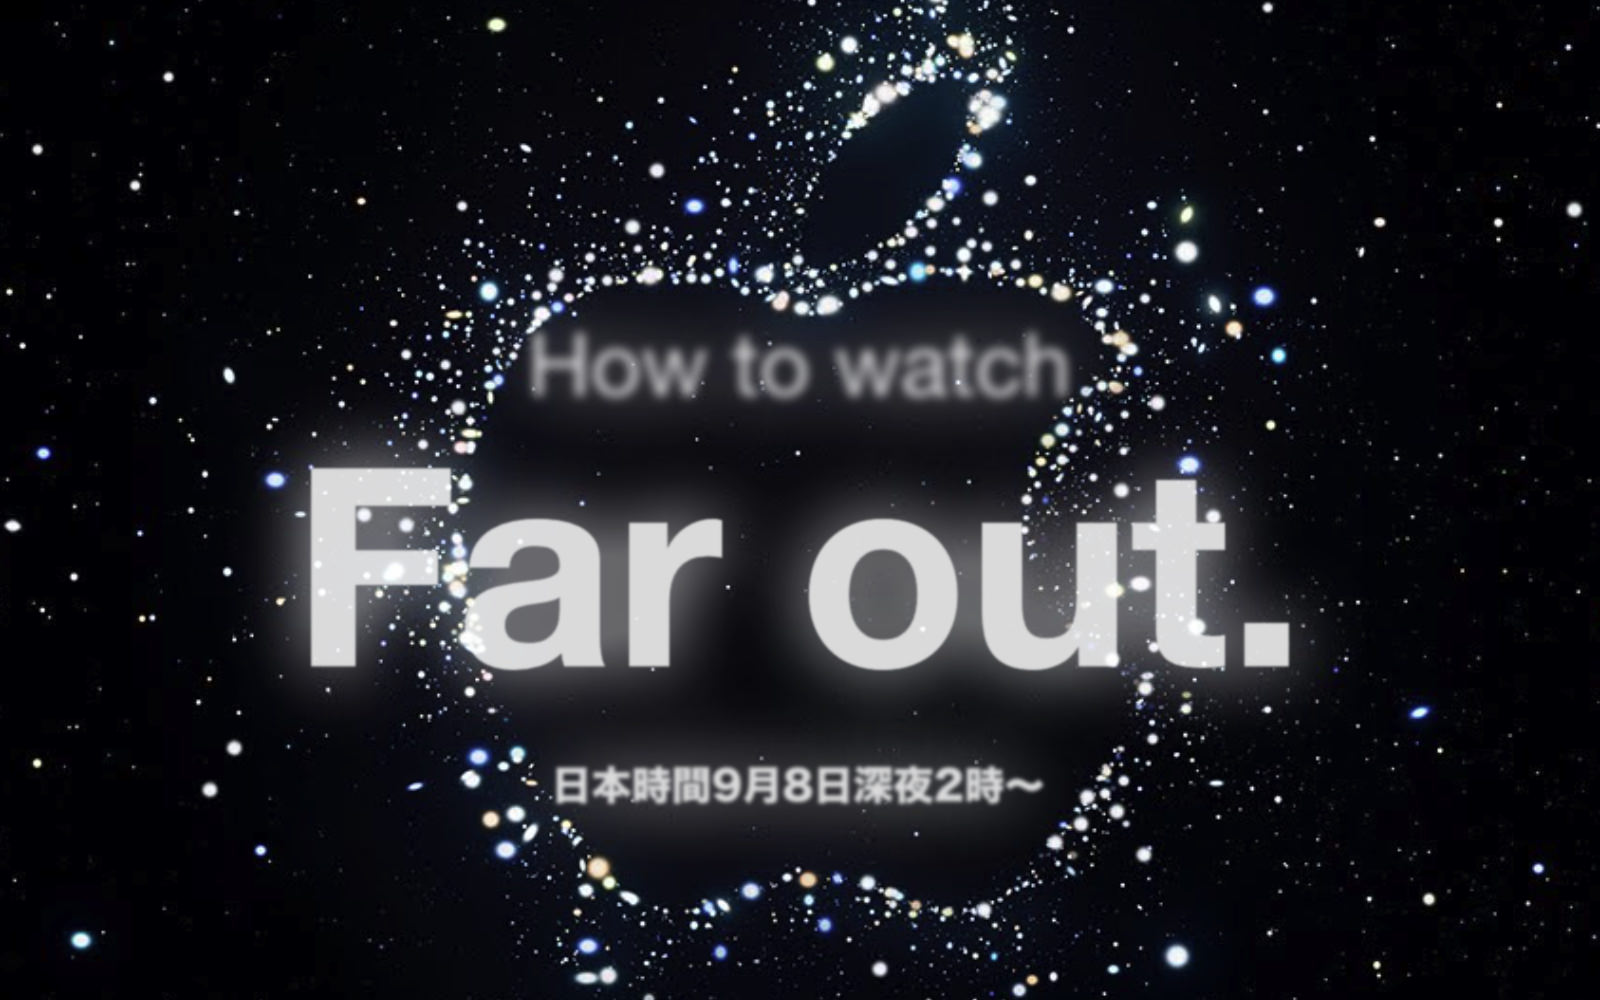 How to watch far out apple special event